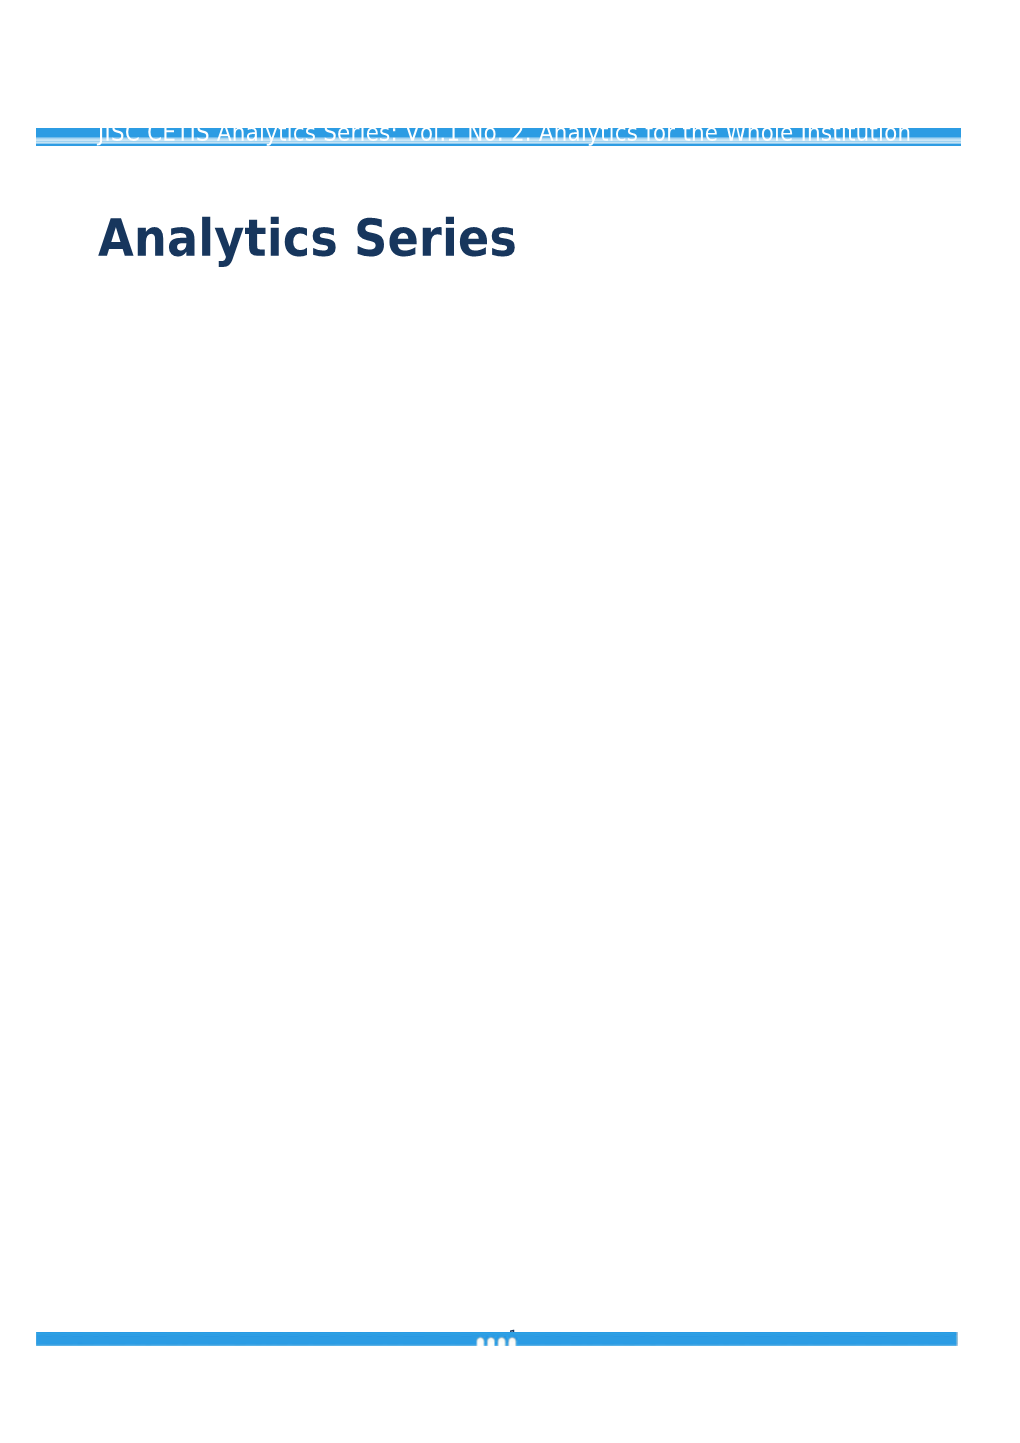 Vol. 1, No. 2. Analytics for the Whole Institution: Balancing Strategy and Tactics